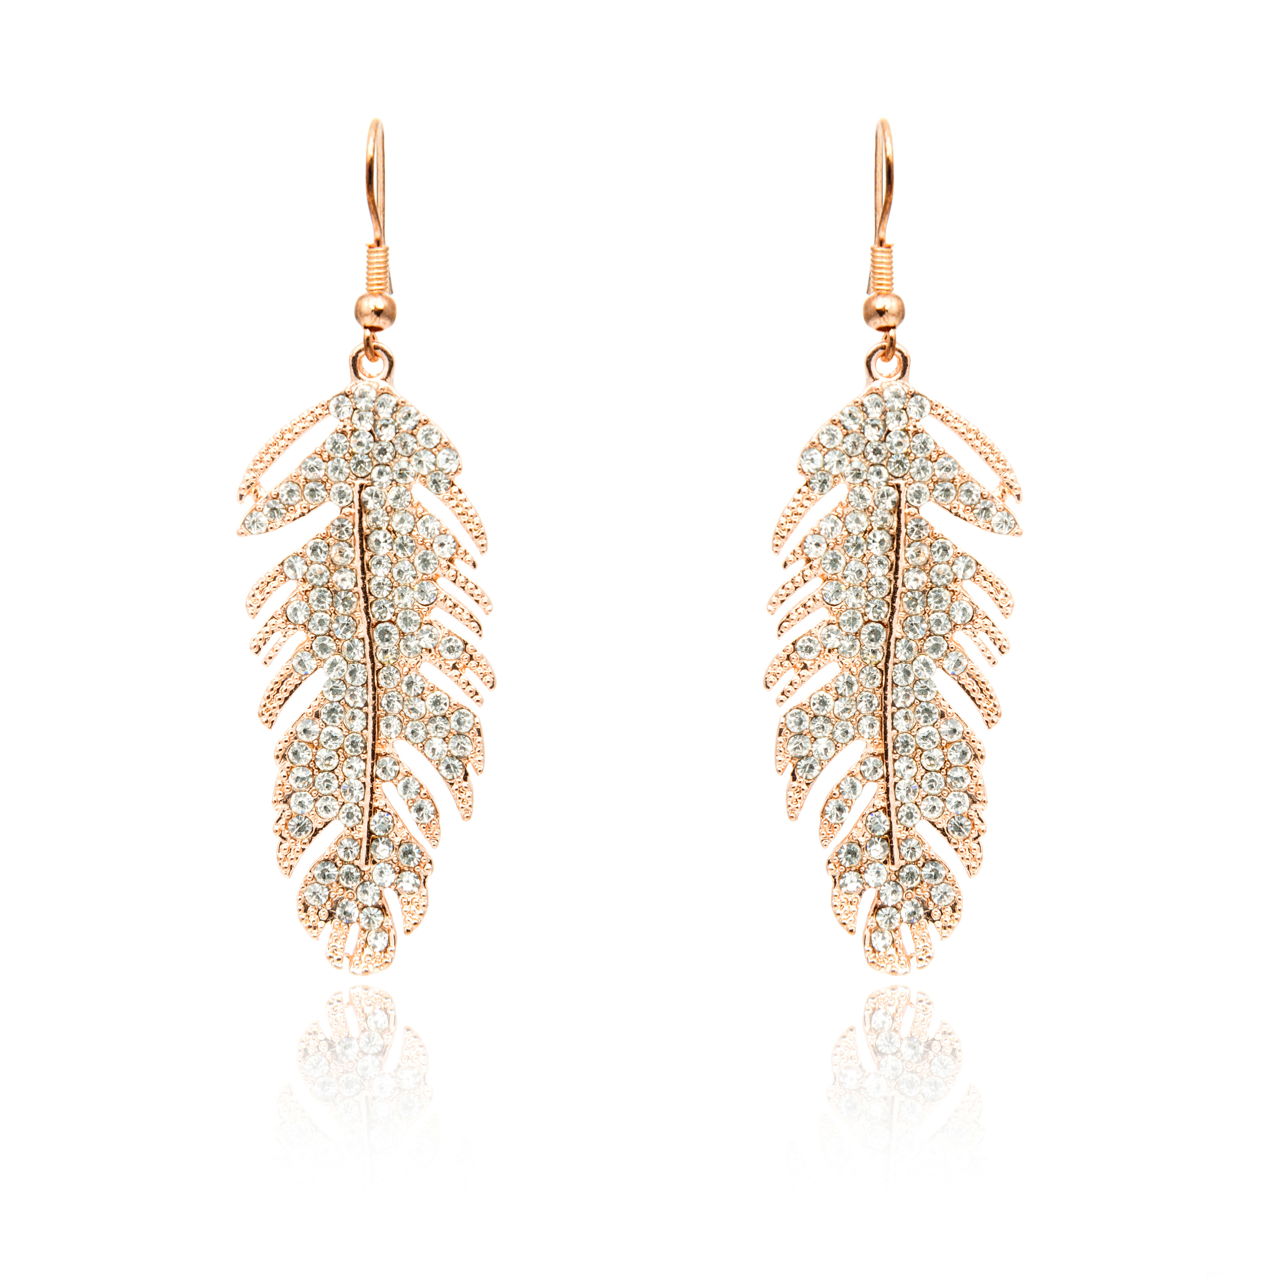 19 Different Types of Earrings Every Woman Needs Right NOW